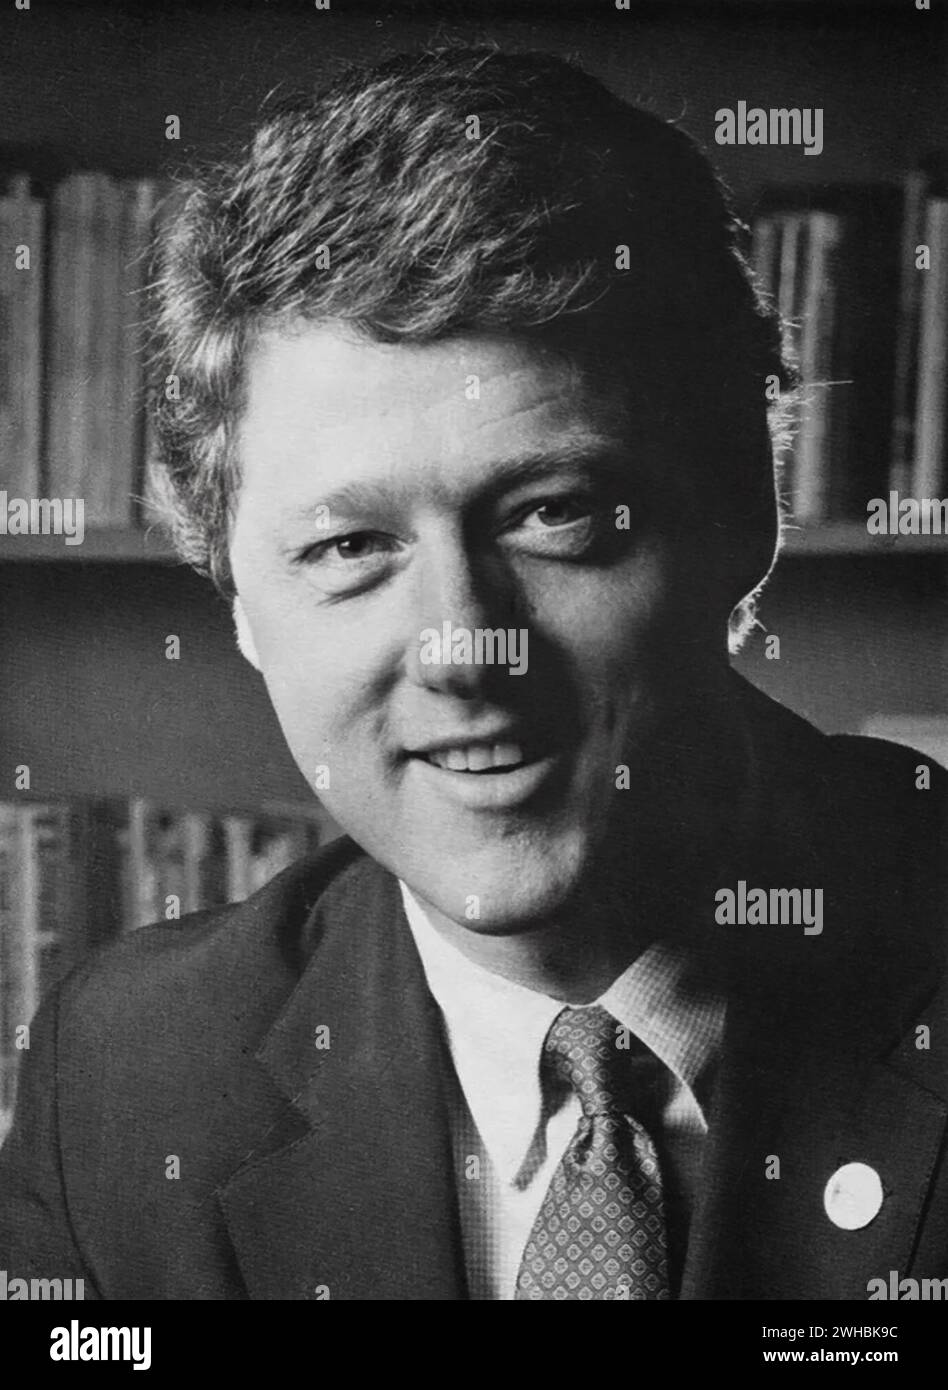 Portrait of Arkansas Governor Bill Clinton, used in his 1986 reelection campaign materials Stock Photo